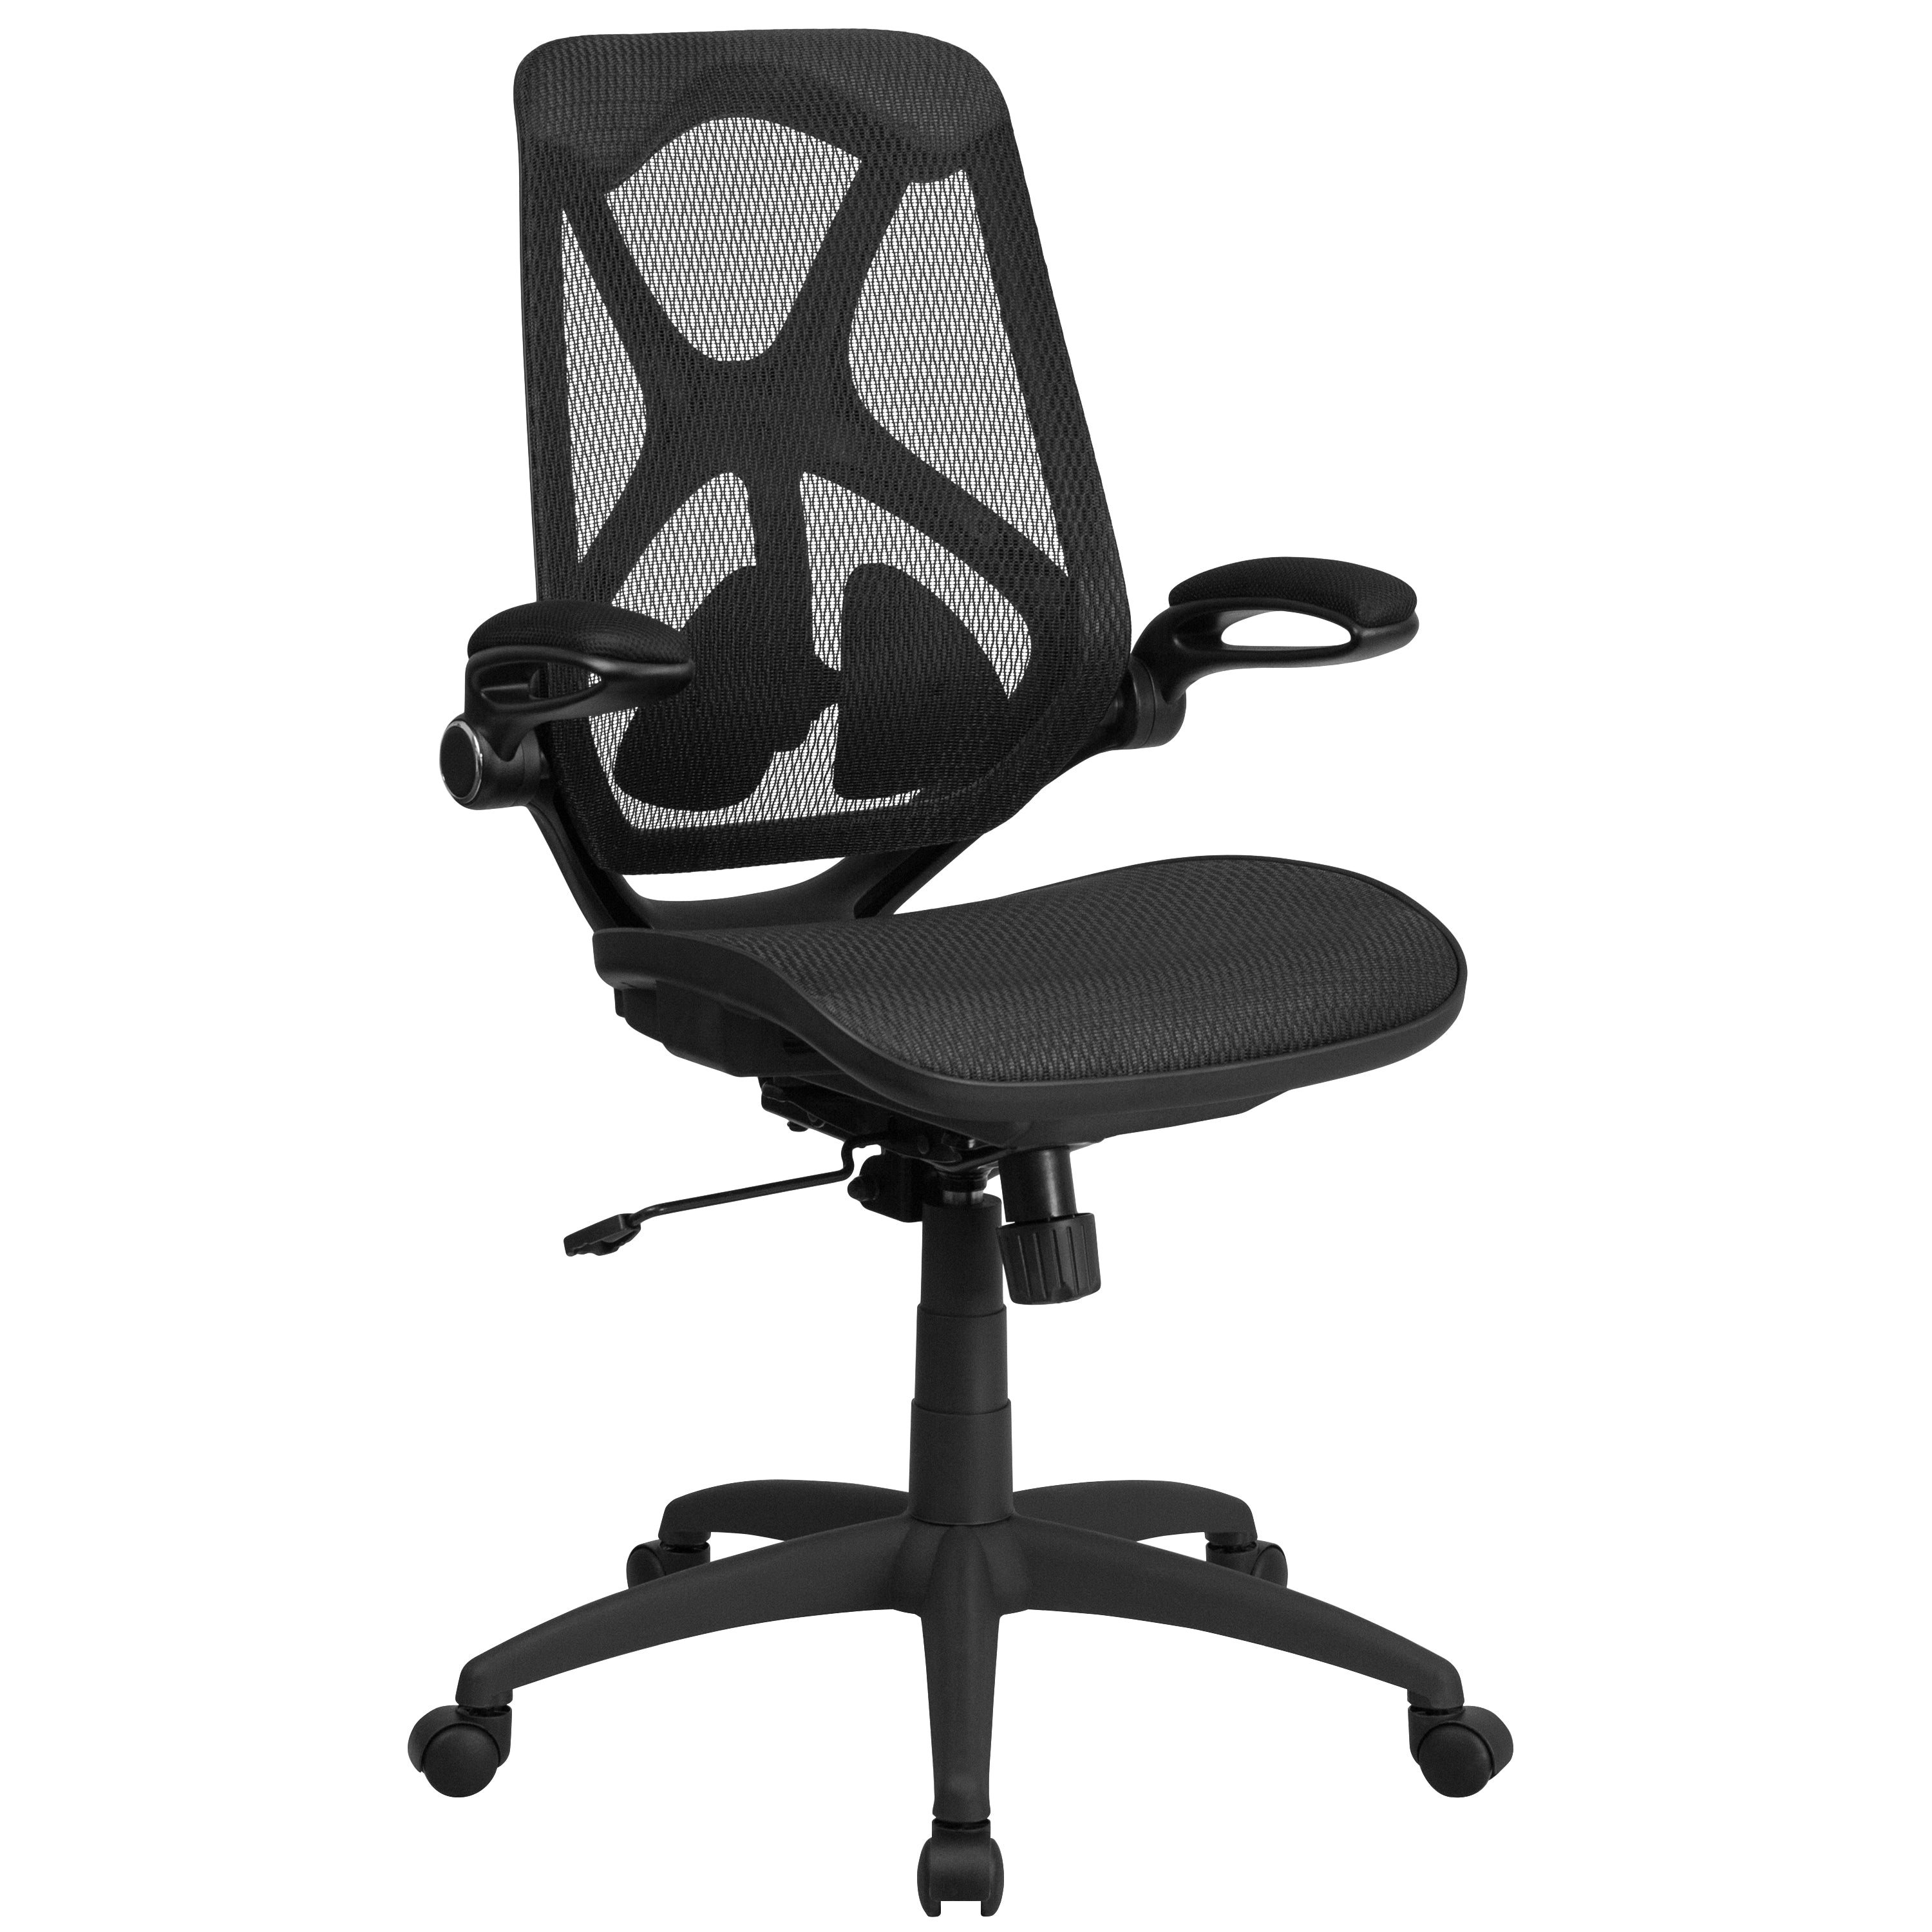 High Back Transparent Mesh Executive Swivel Ergonomic Office Chair with Adjustable Lumbar, 2-Paddle Control and Flip-Up Arms-Office Chair-Flash Furniture-Wall2Wall Furnishings